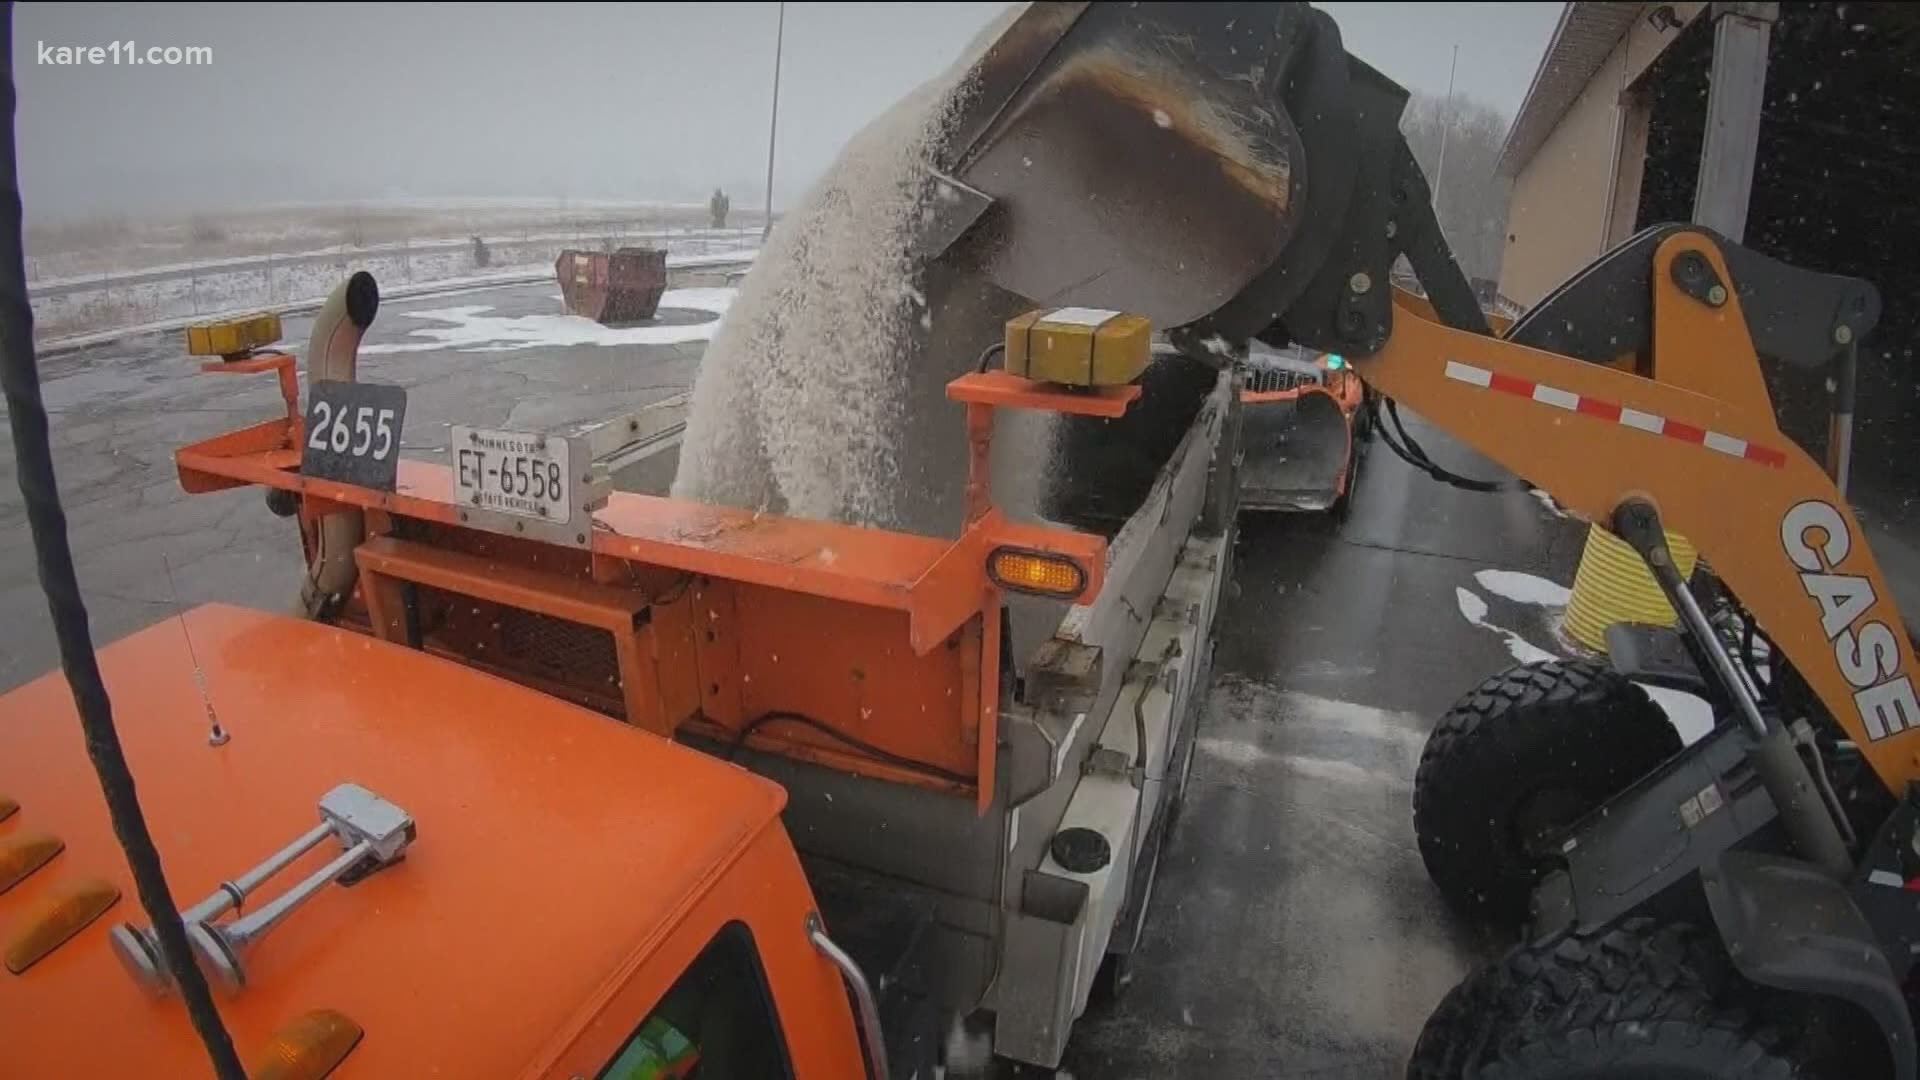 Road salt is a big part of winter in Minnesota. Why salt becomes less effective the colder it gets